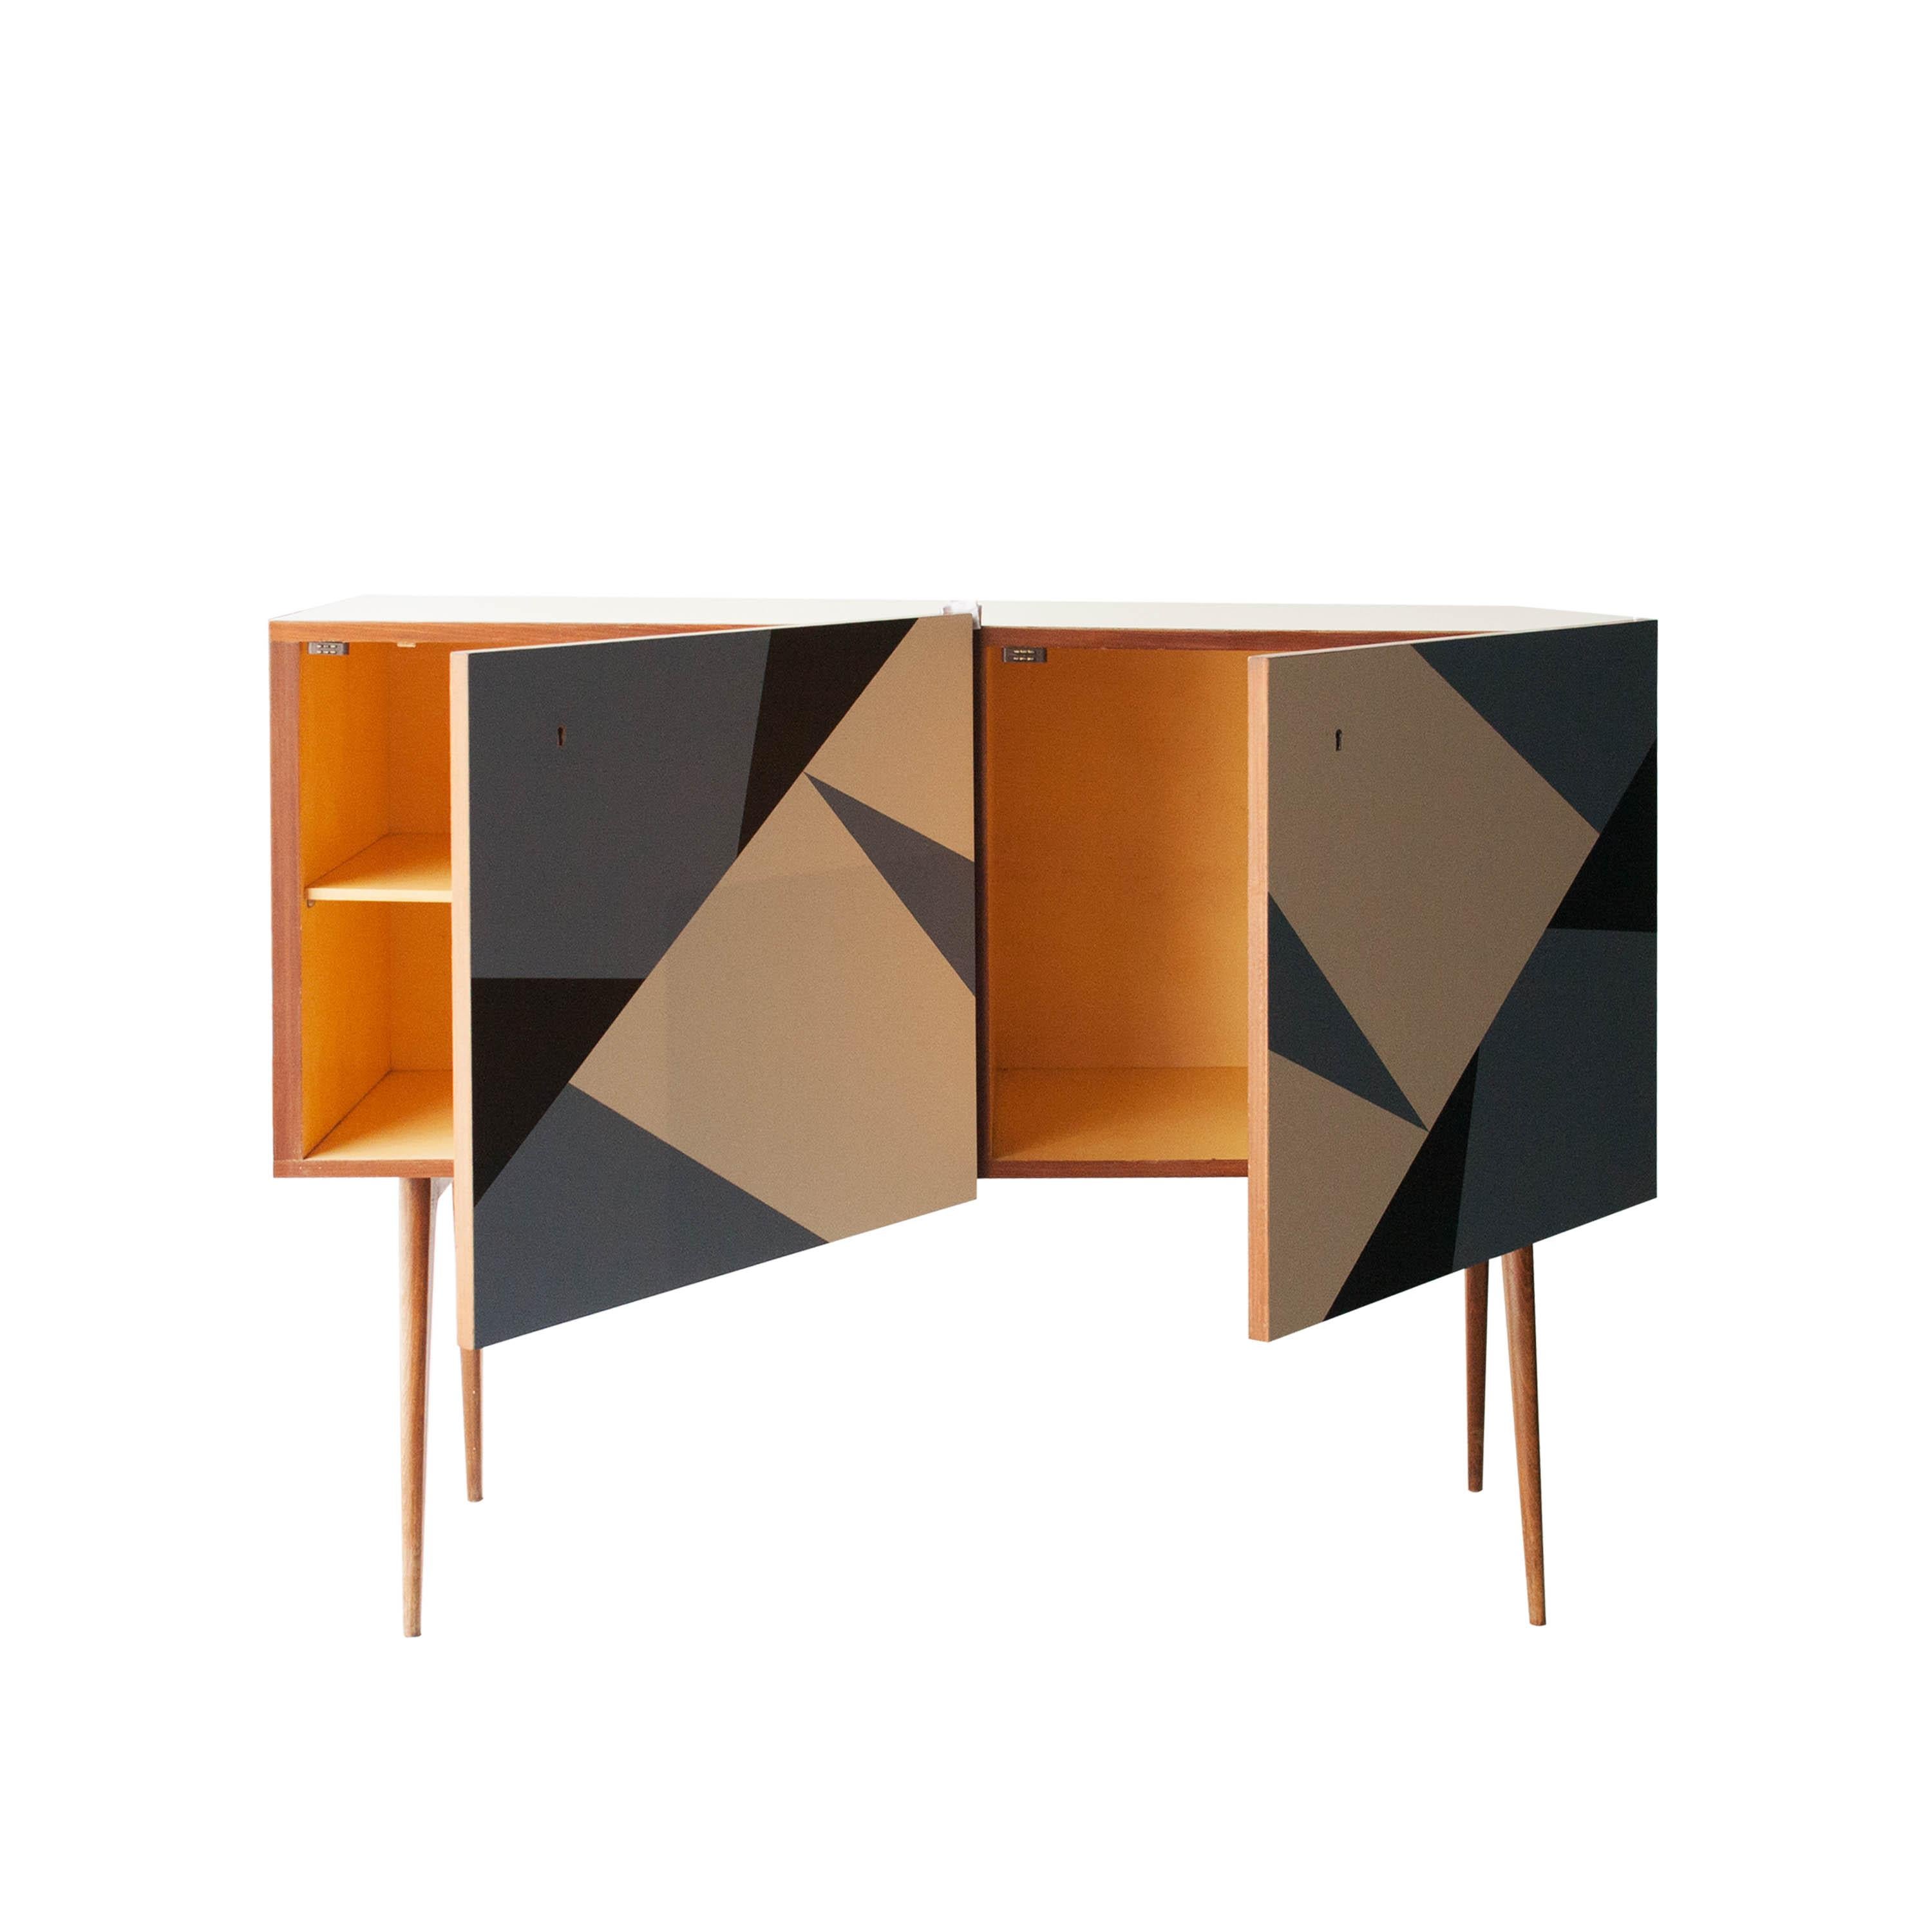 Sideboard with wooden structure and two doors. Top and doors coated in blue, white and black melamine whit geometric forms. Wooden conical legs.